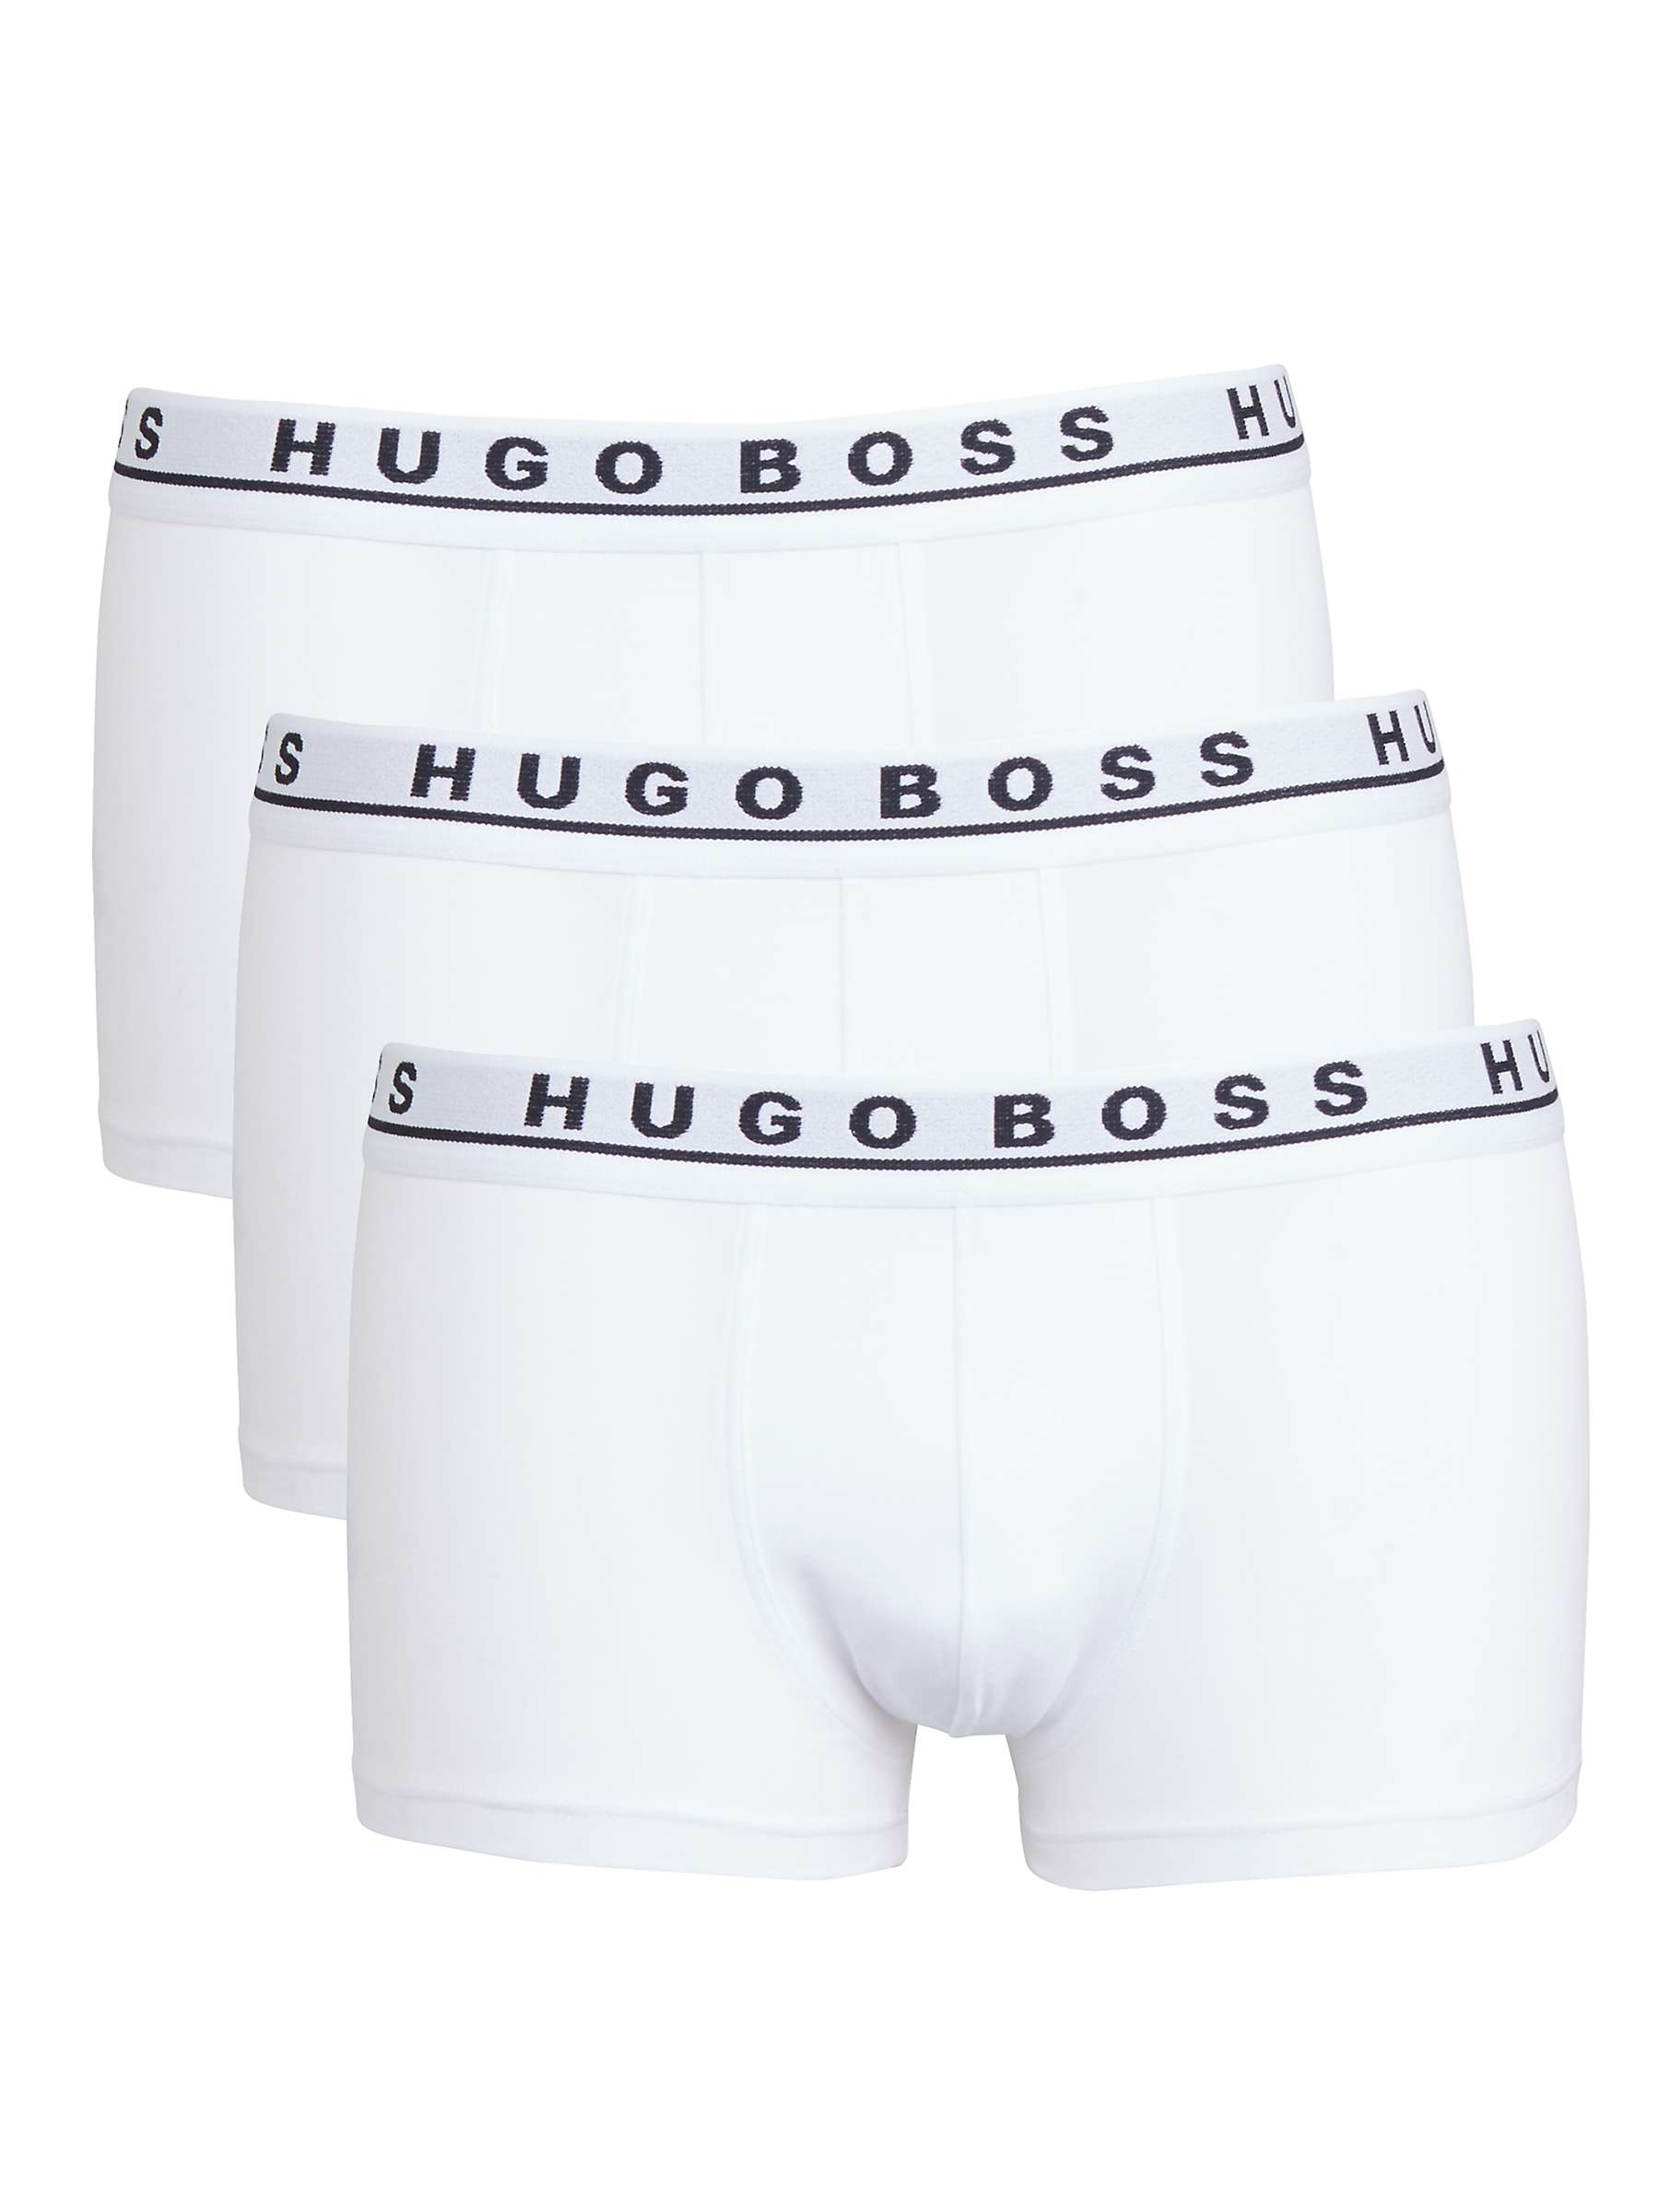 Buy BOSS Stretch Cotton Trunks, Pack of 3 Online at johnlewis.com